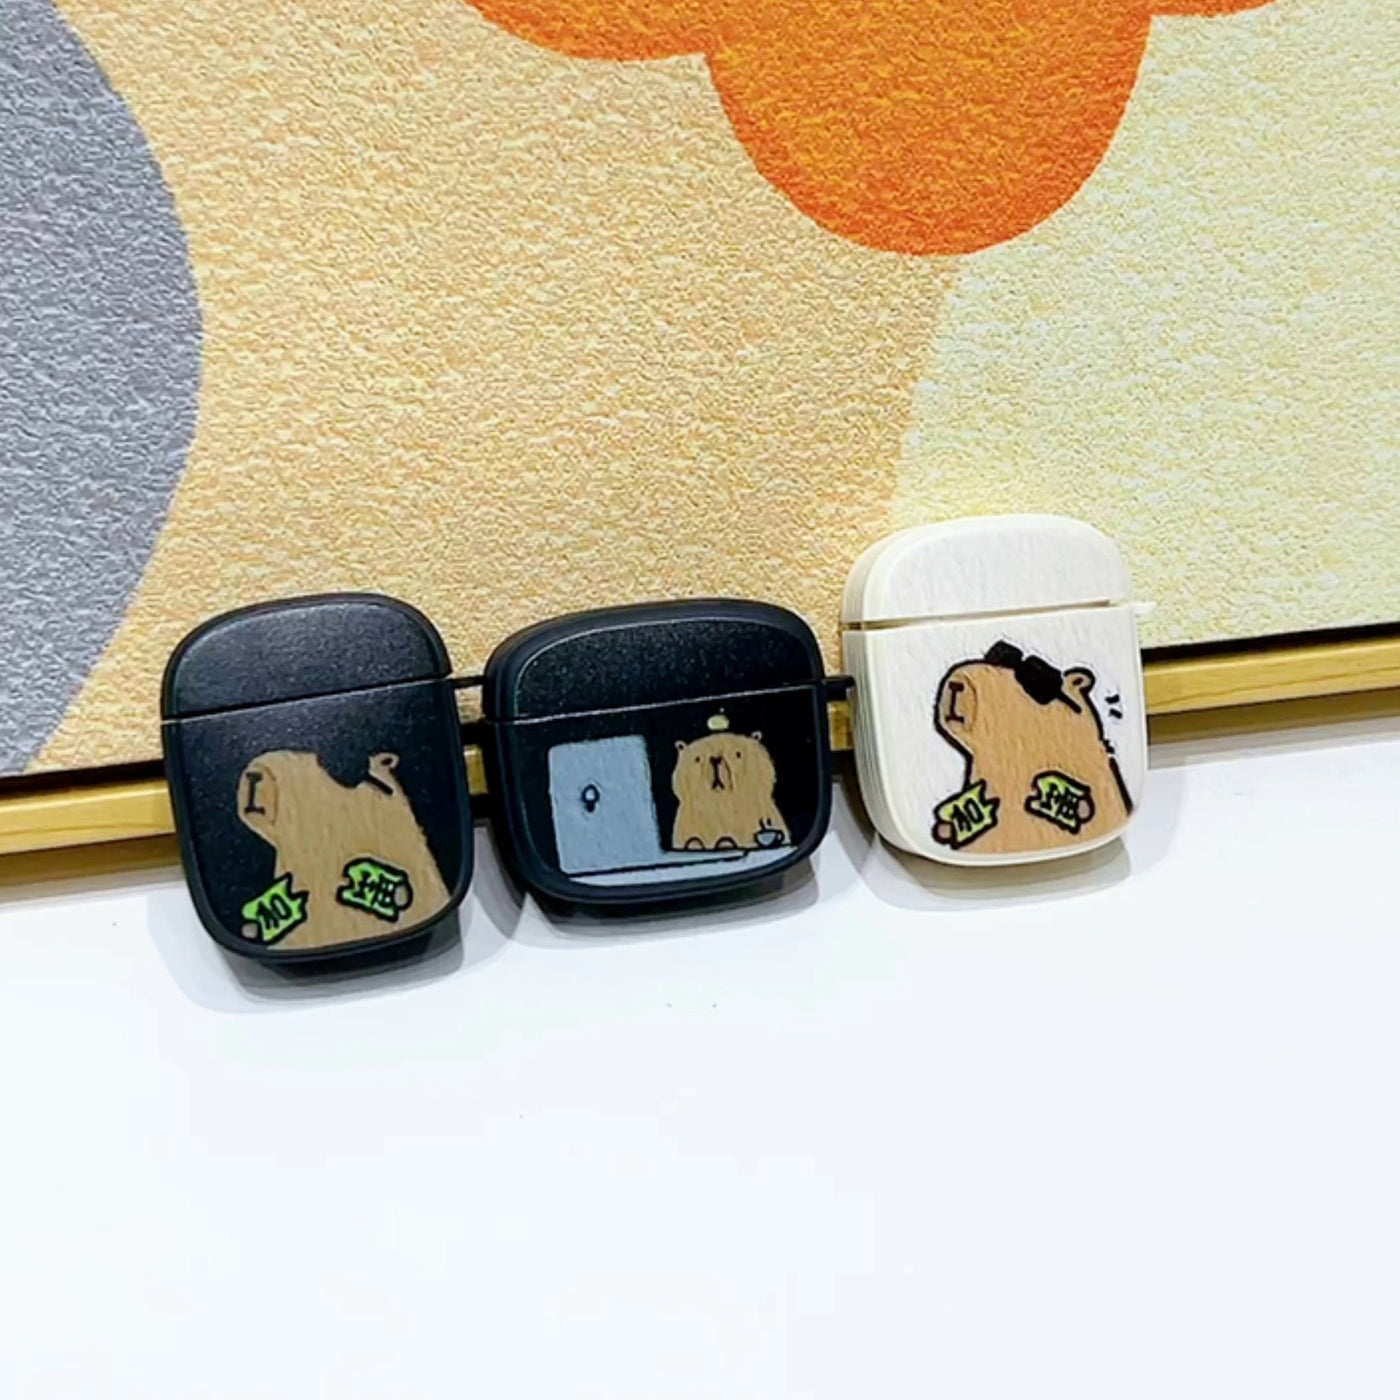 【AIRPODS CASE】カピバラ AirPods /AirPods Proケース